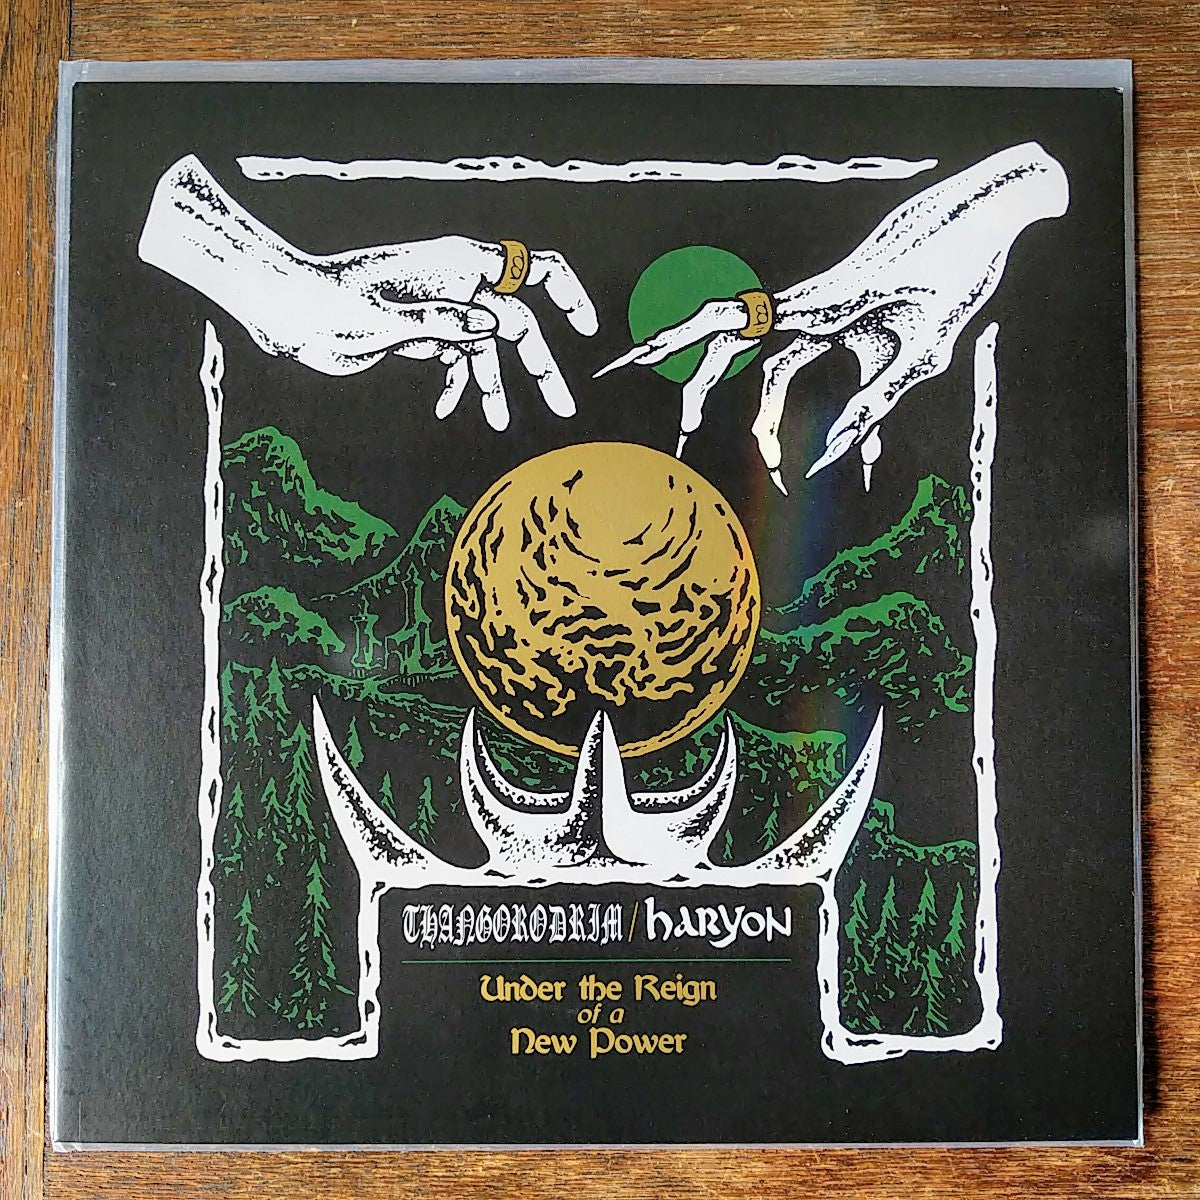 [SOLD OUT] THANGORODRIM / HARYON "Under the Reign of a New Power" vinyl LP (lim.500)